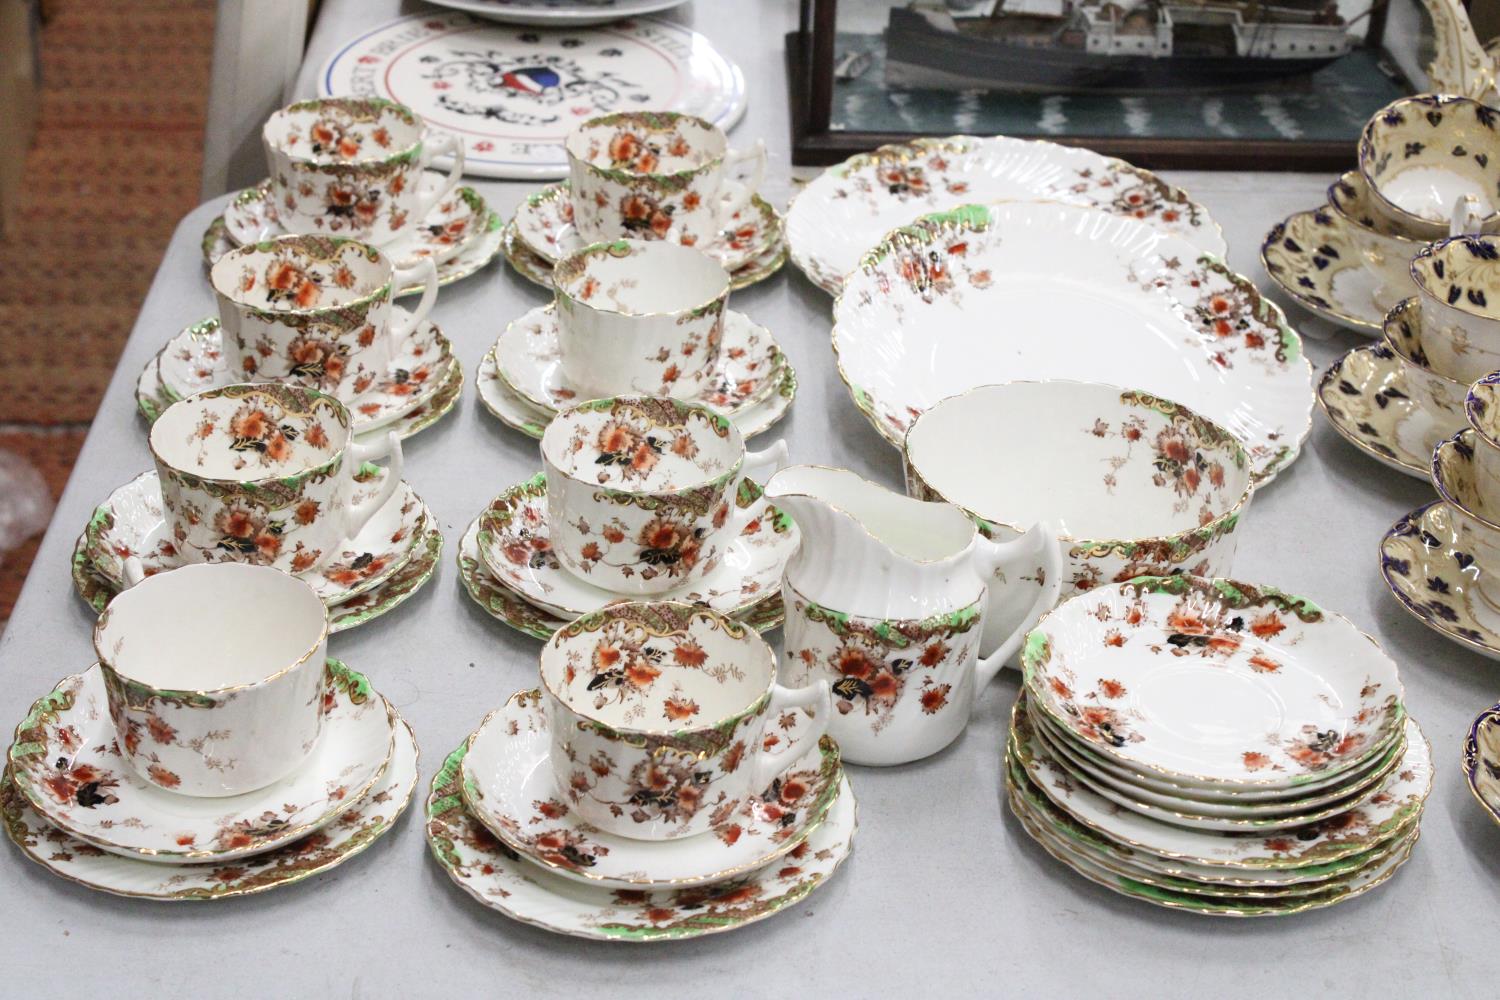 A ROYAL ALBERT CROWN CHINA "POPPY" PART TEASET TO INCLUDE CUPS, SAUCERS, SIDE PLATES AND SUGAR